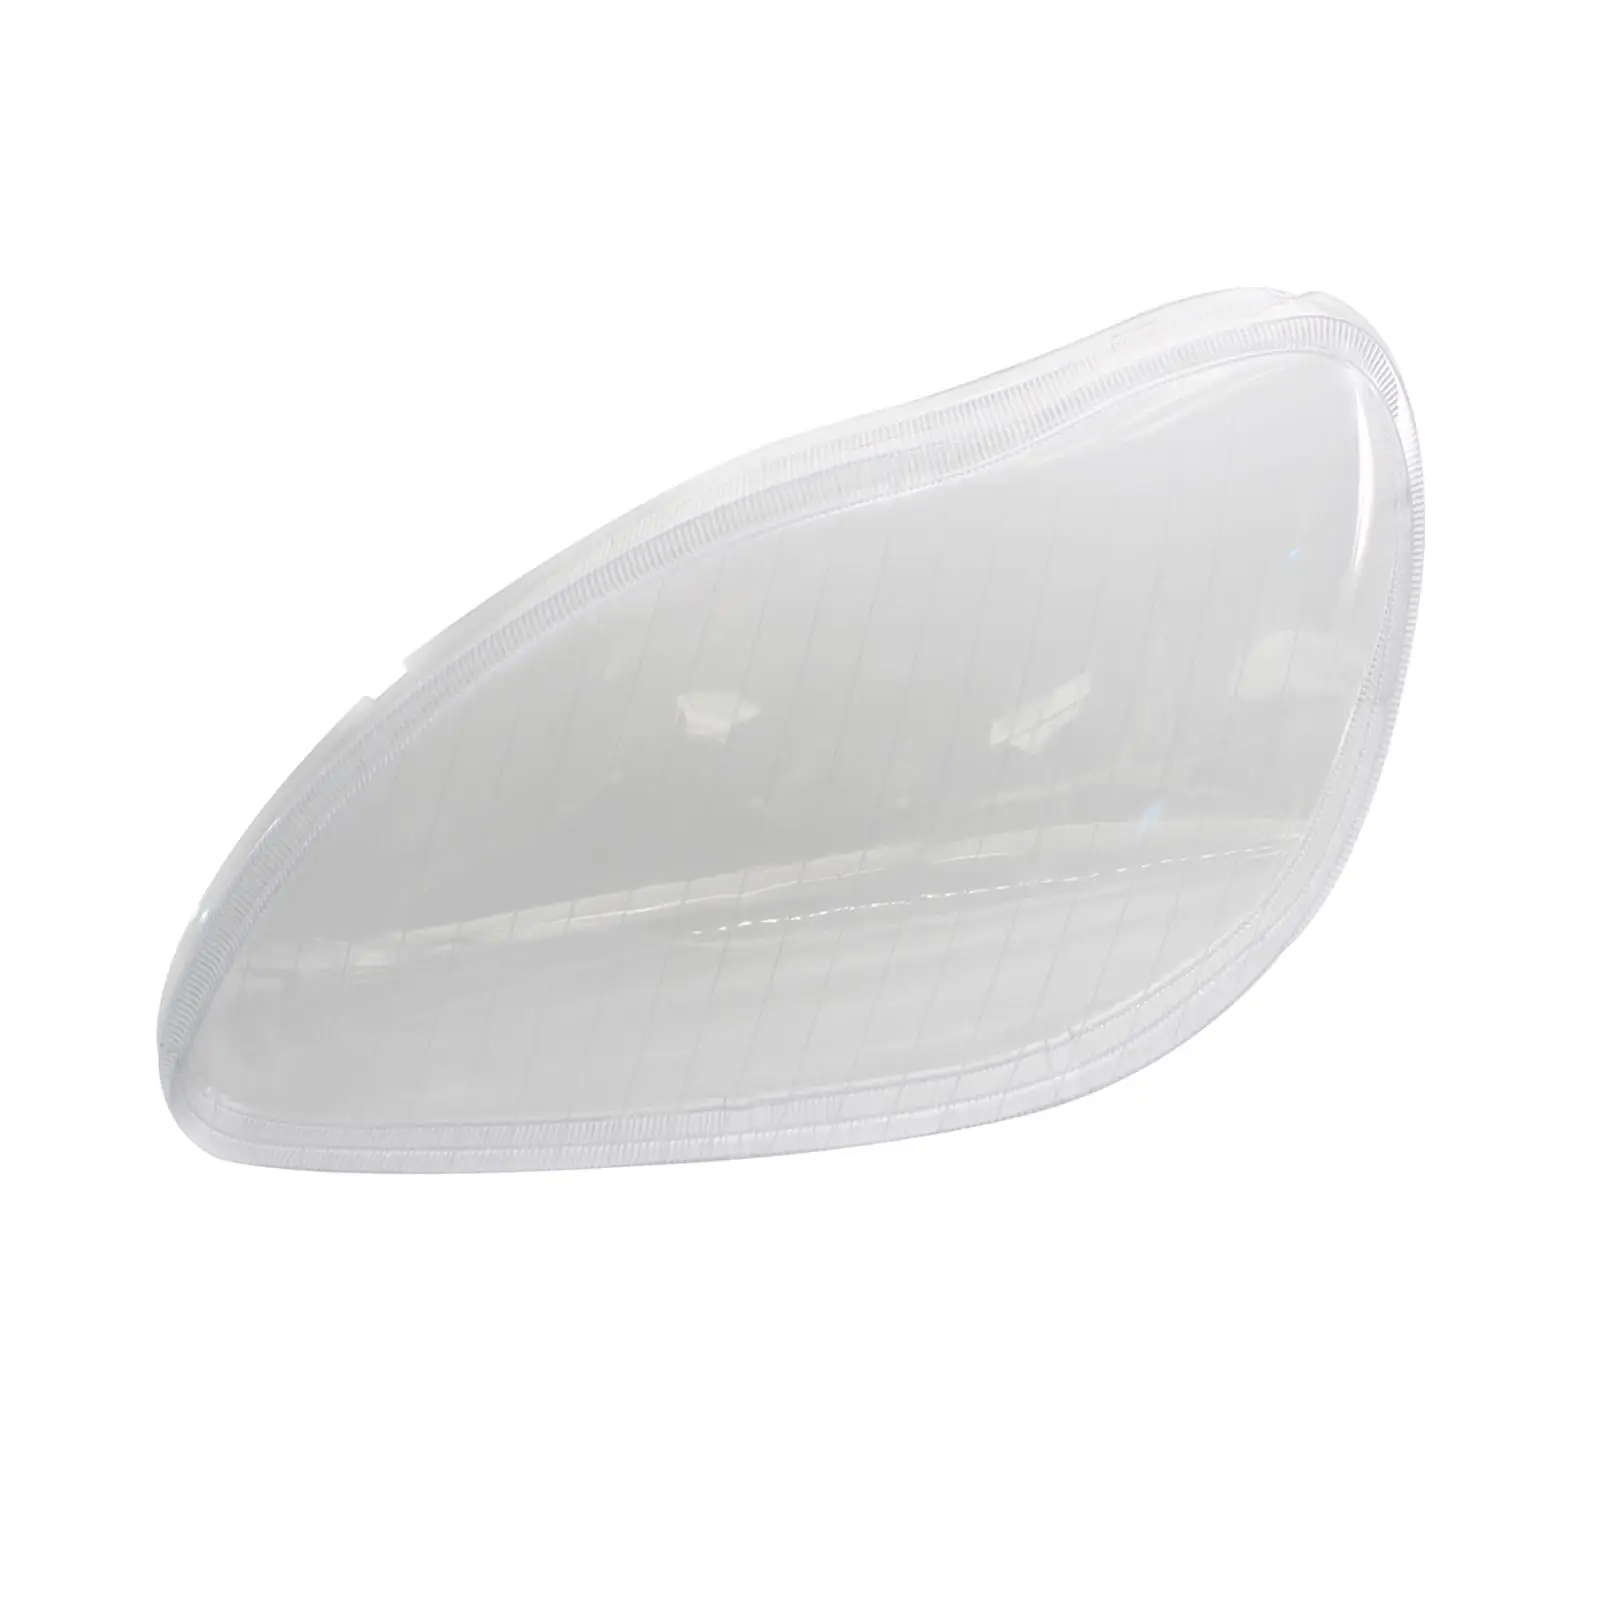 Headlight Lens Cover 2208204461 Replacement Vehicle Durable Accessory Clear for Mercedes-benz W220 S280 S350 S600 S500